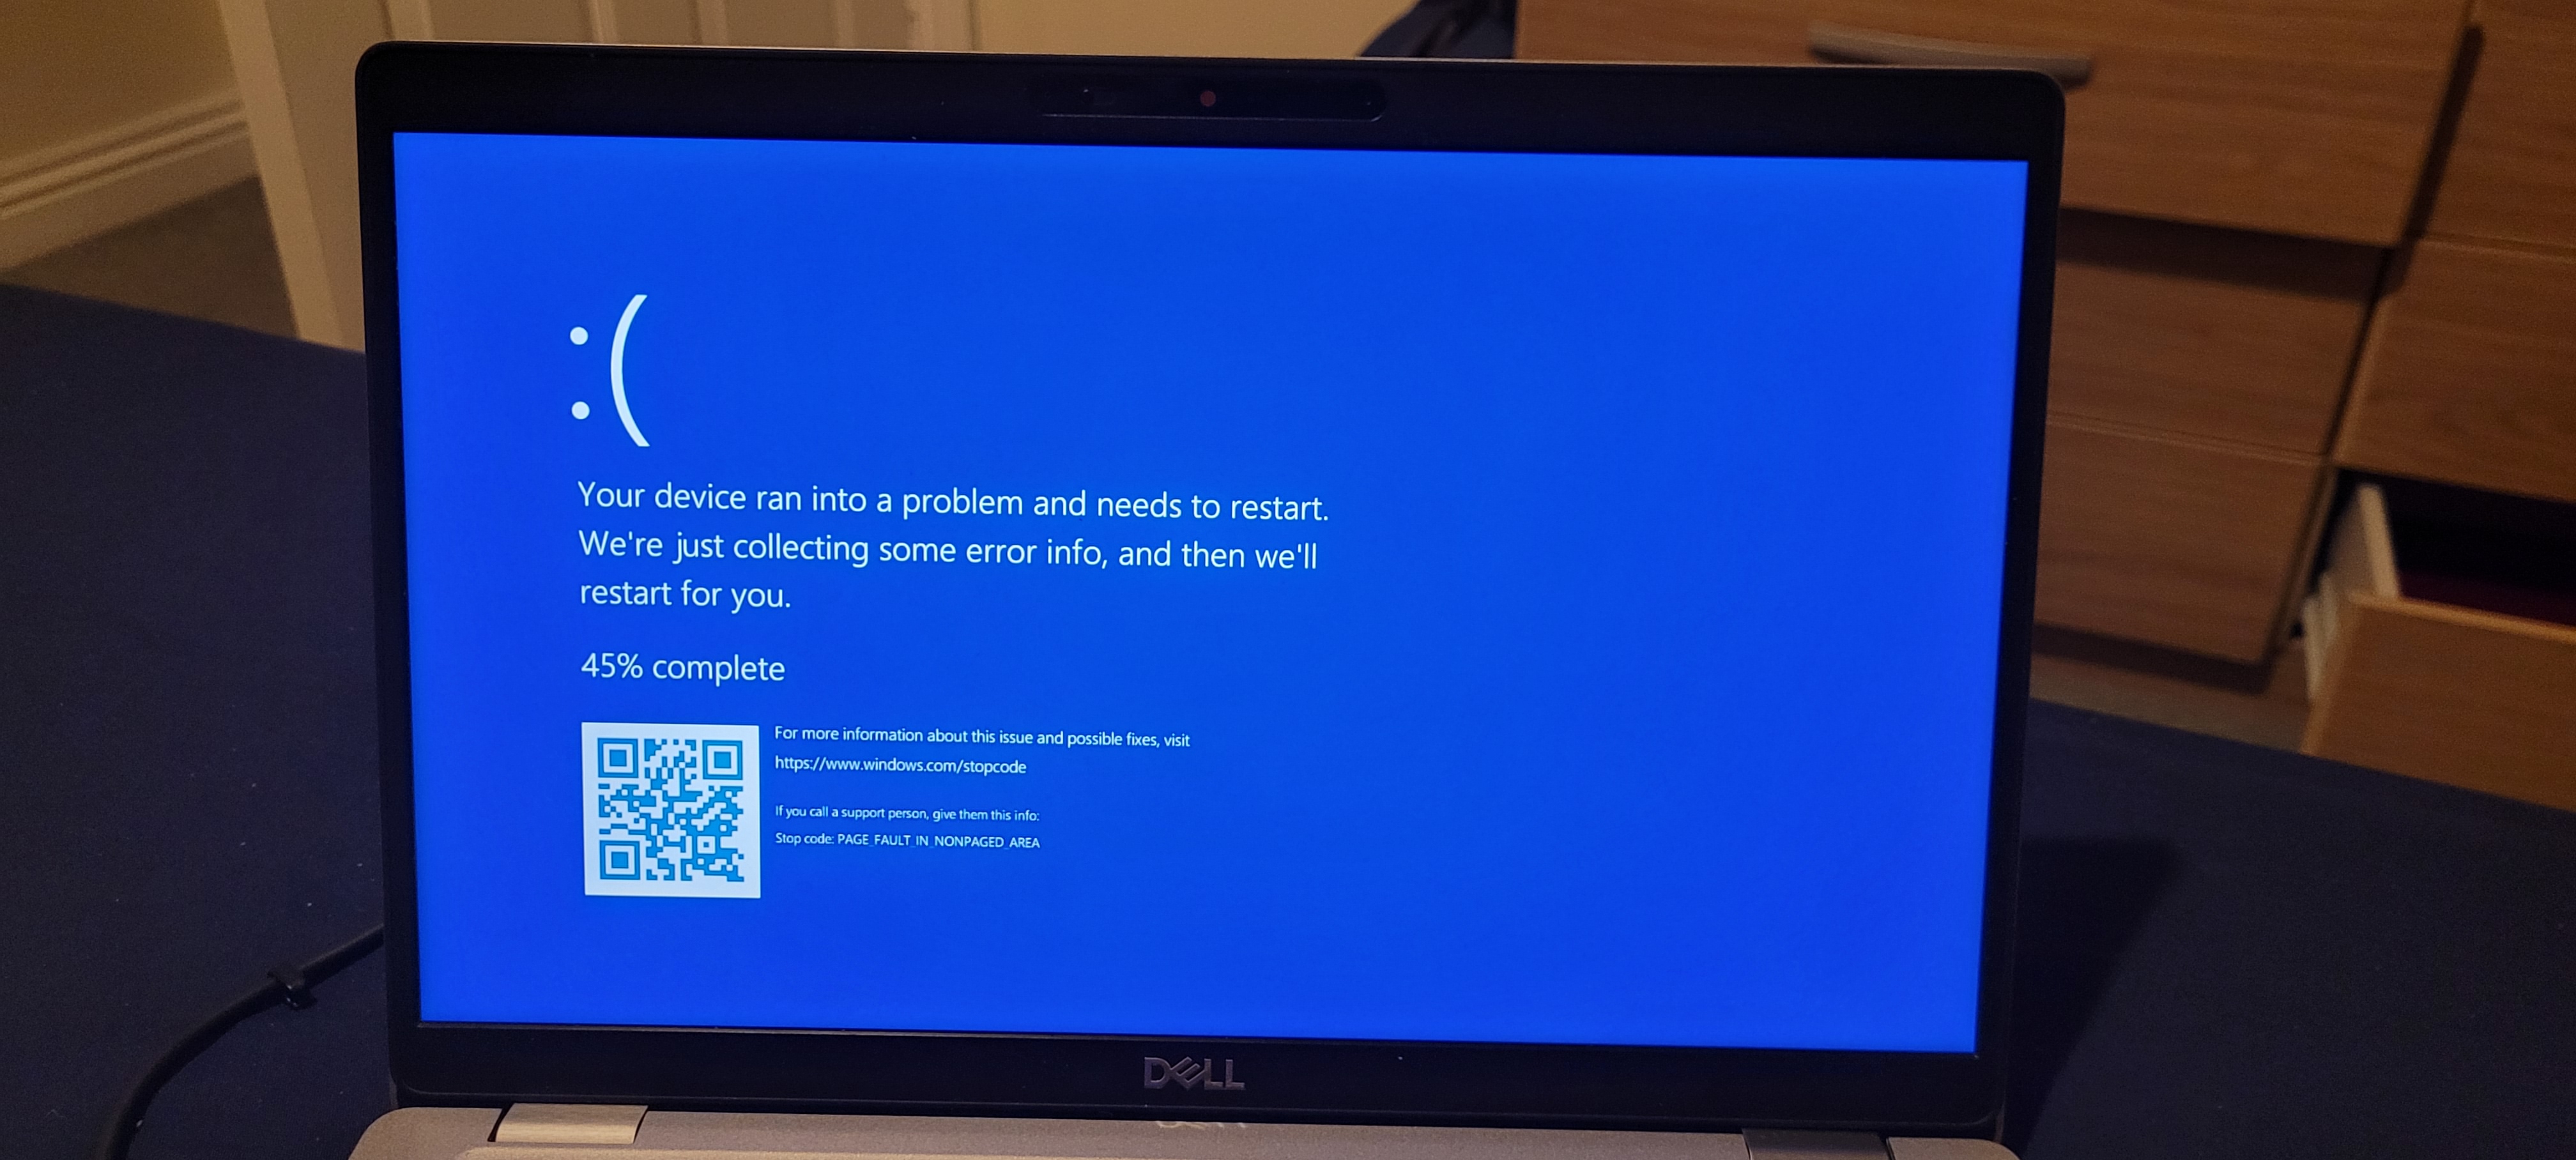 Dell laptop with a blue screen